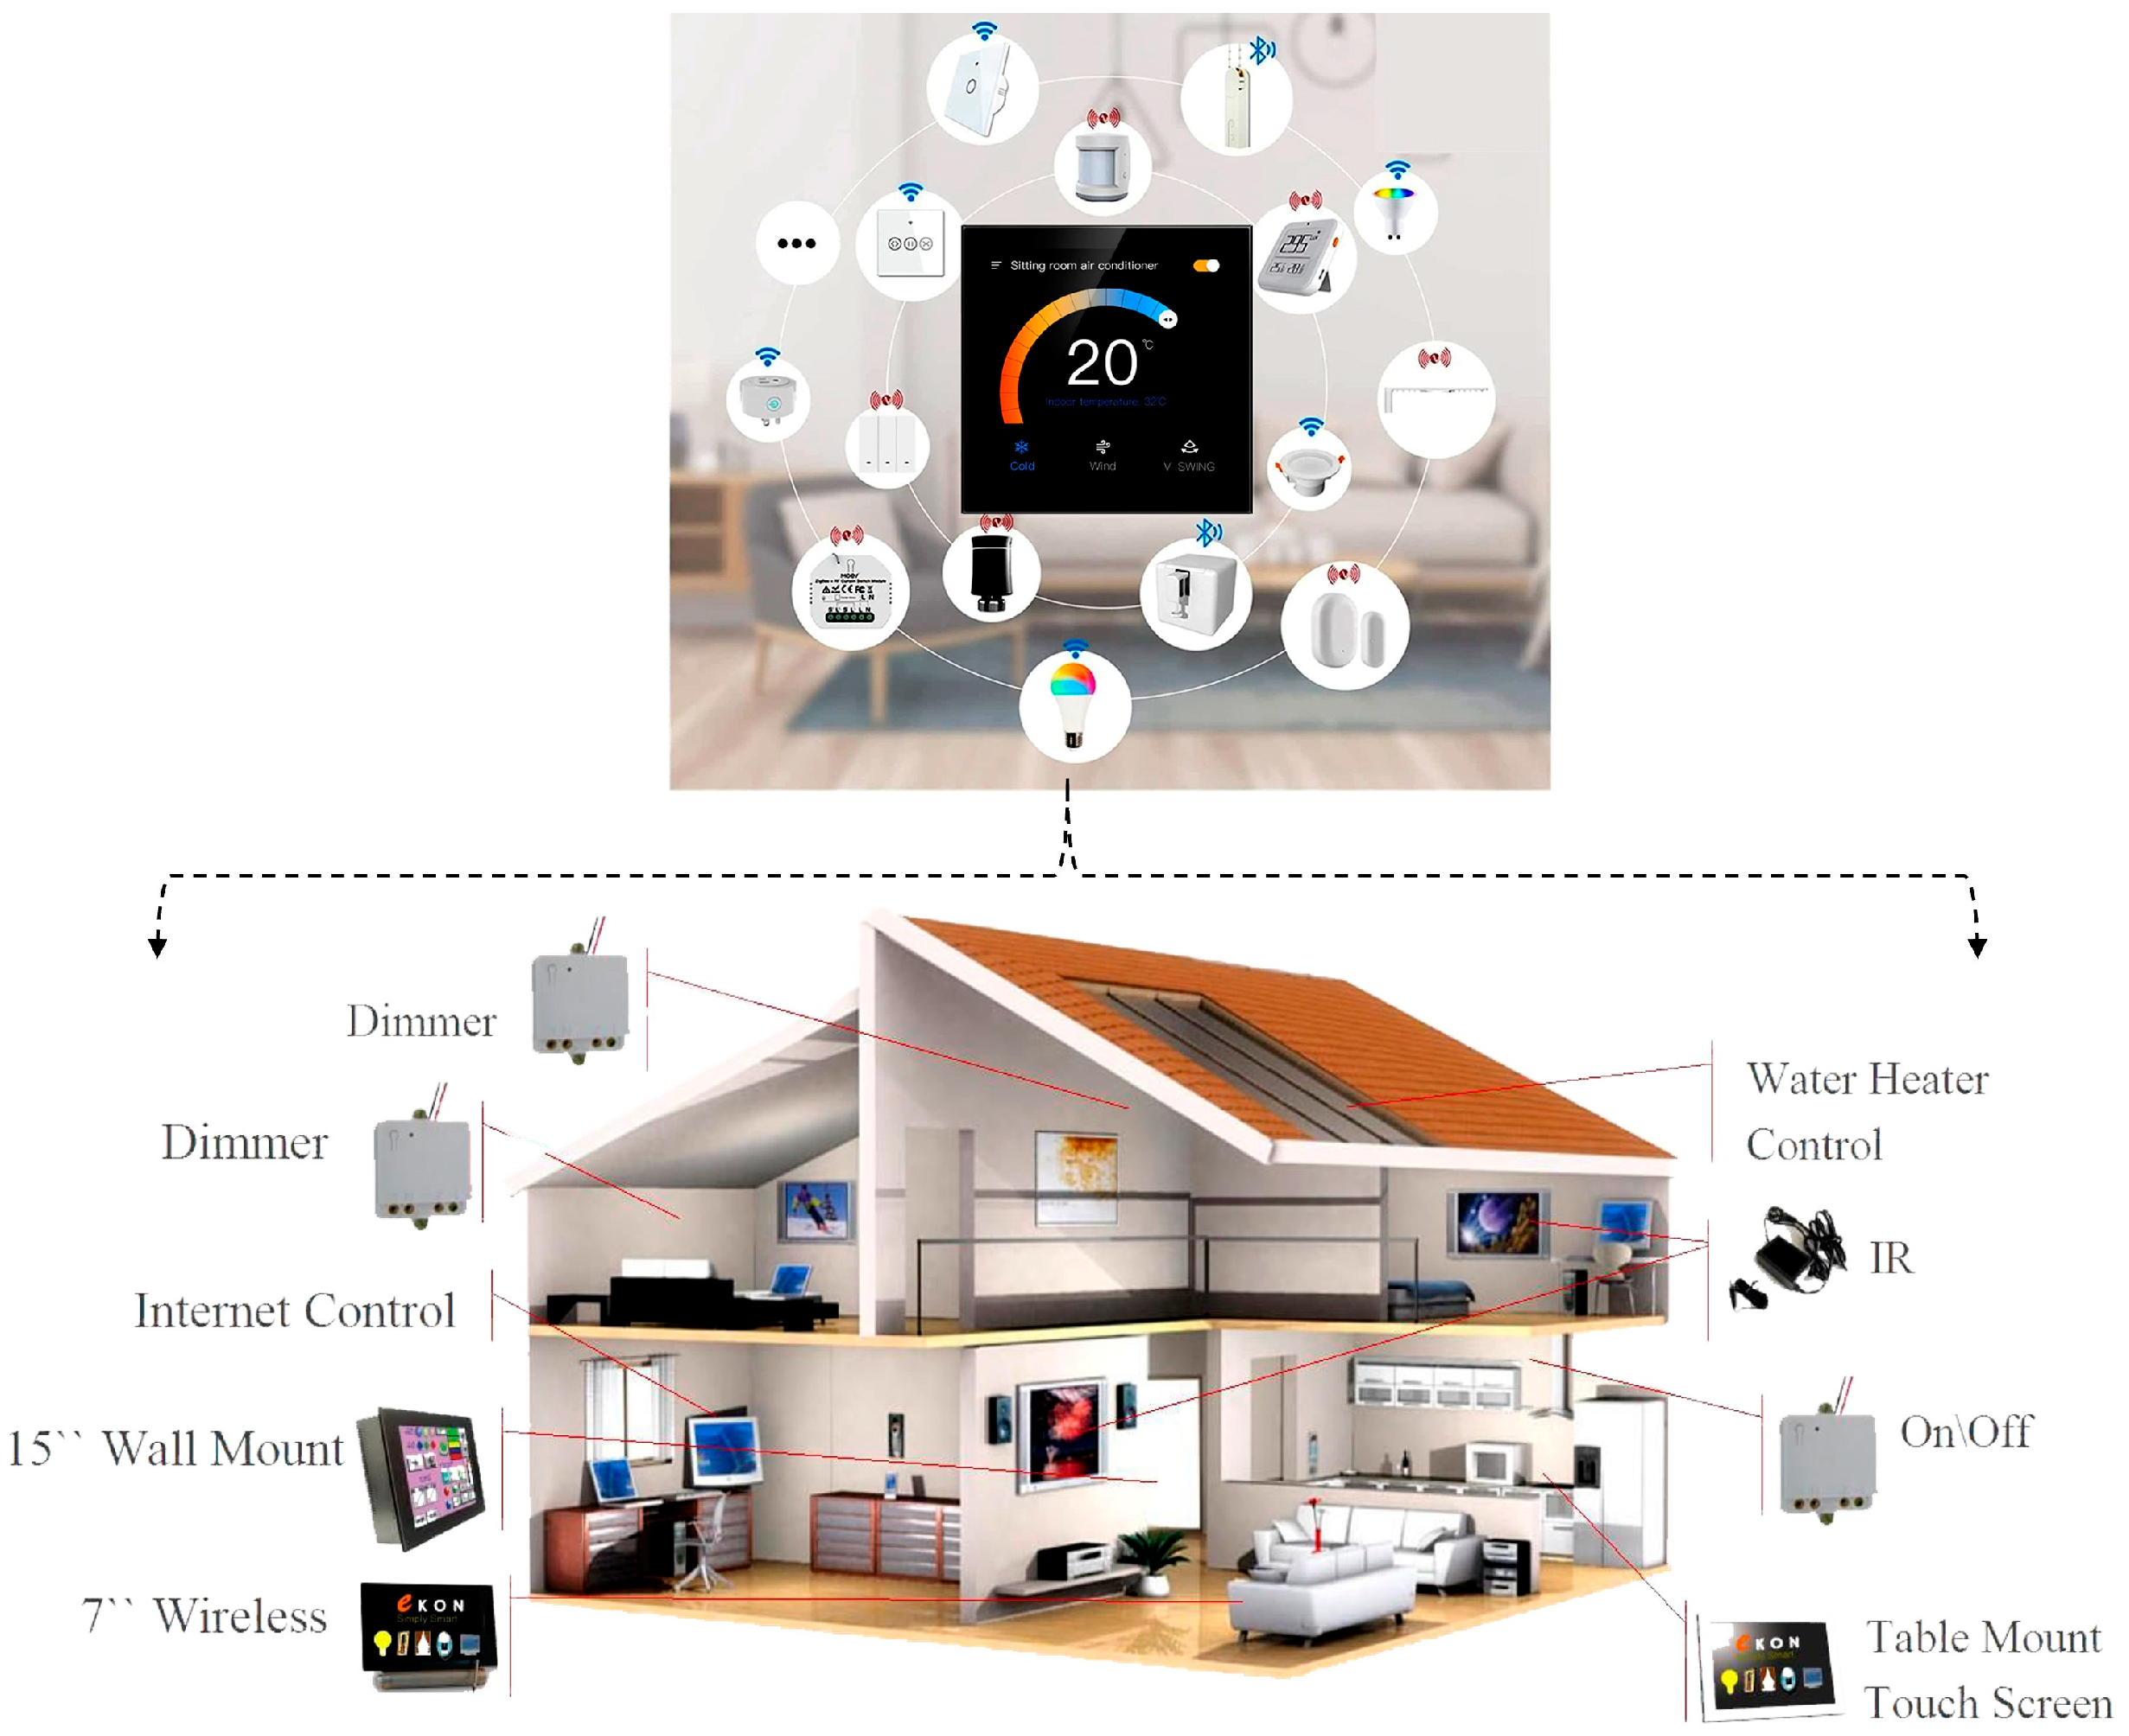 Make Your Home Smarter With These Smart Home Gadgets